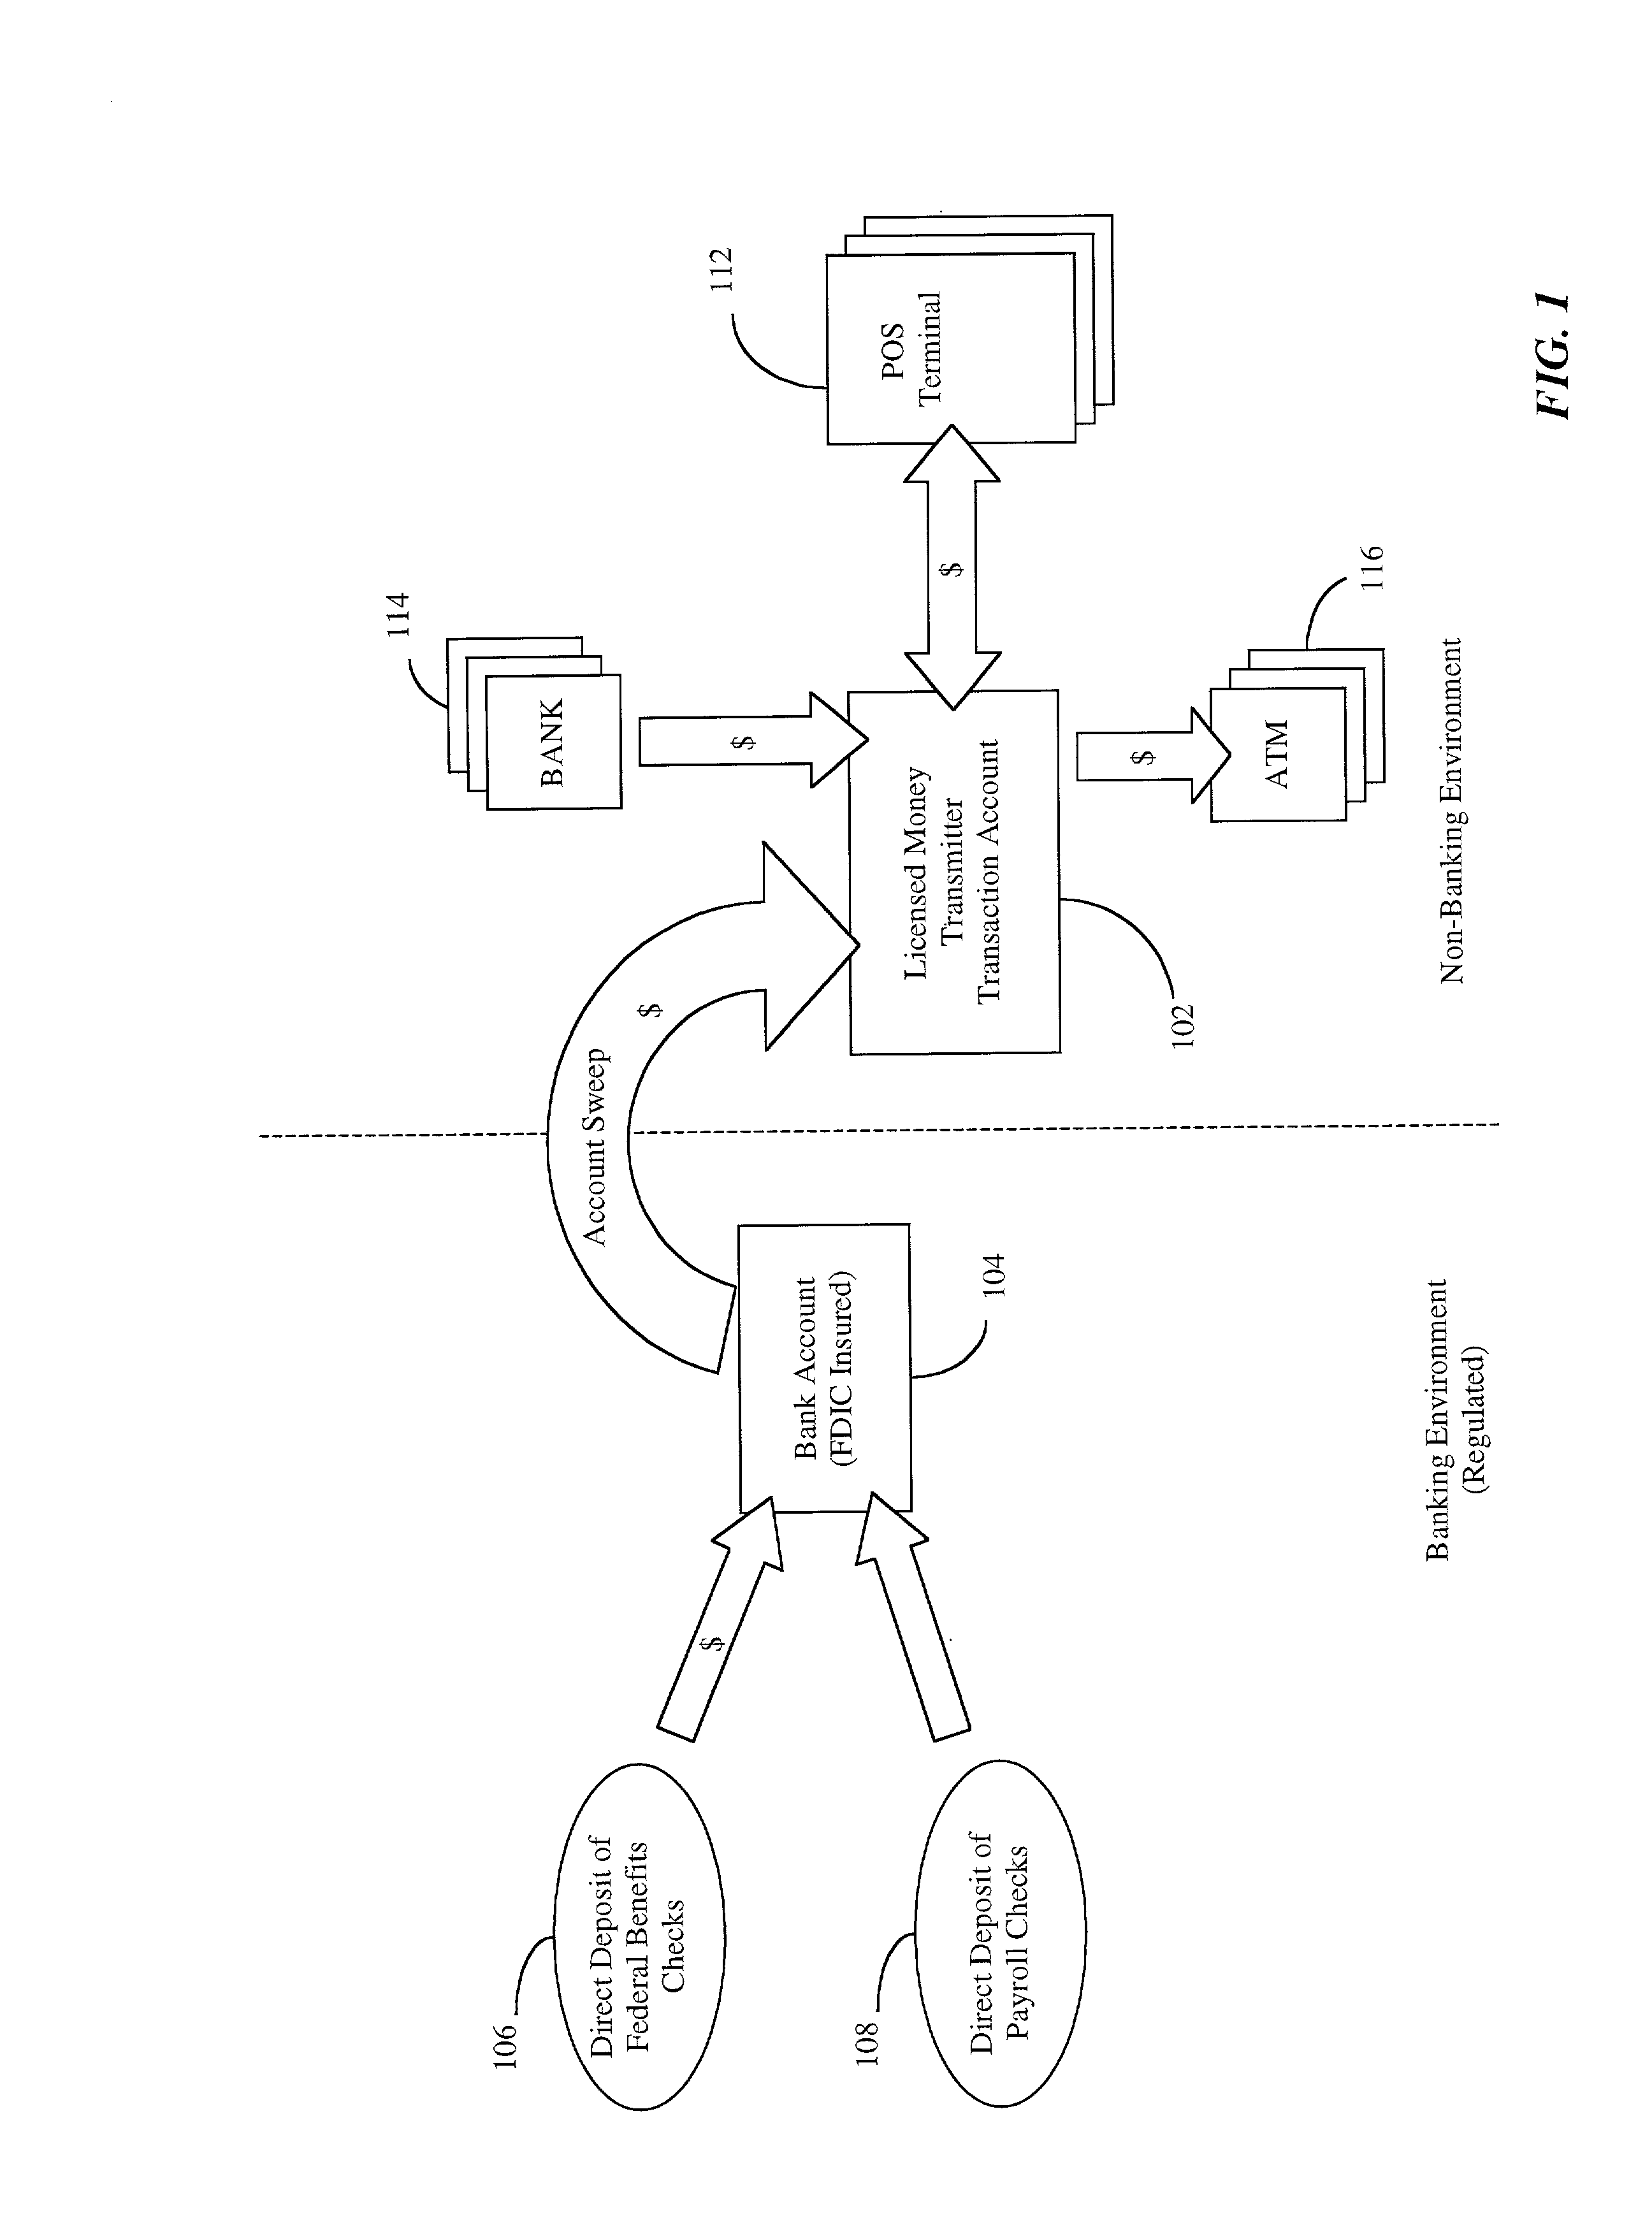 System and method for issuing negotiable instruments by licensed money transmitter from direct deposits